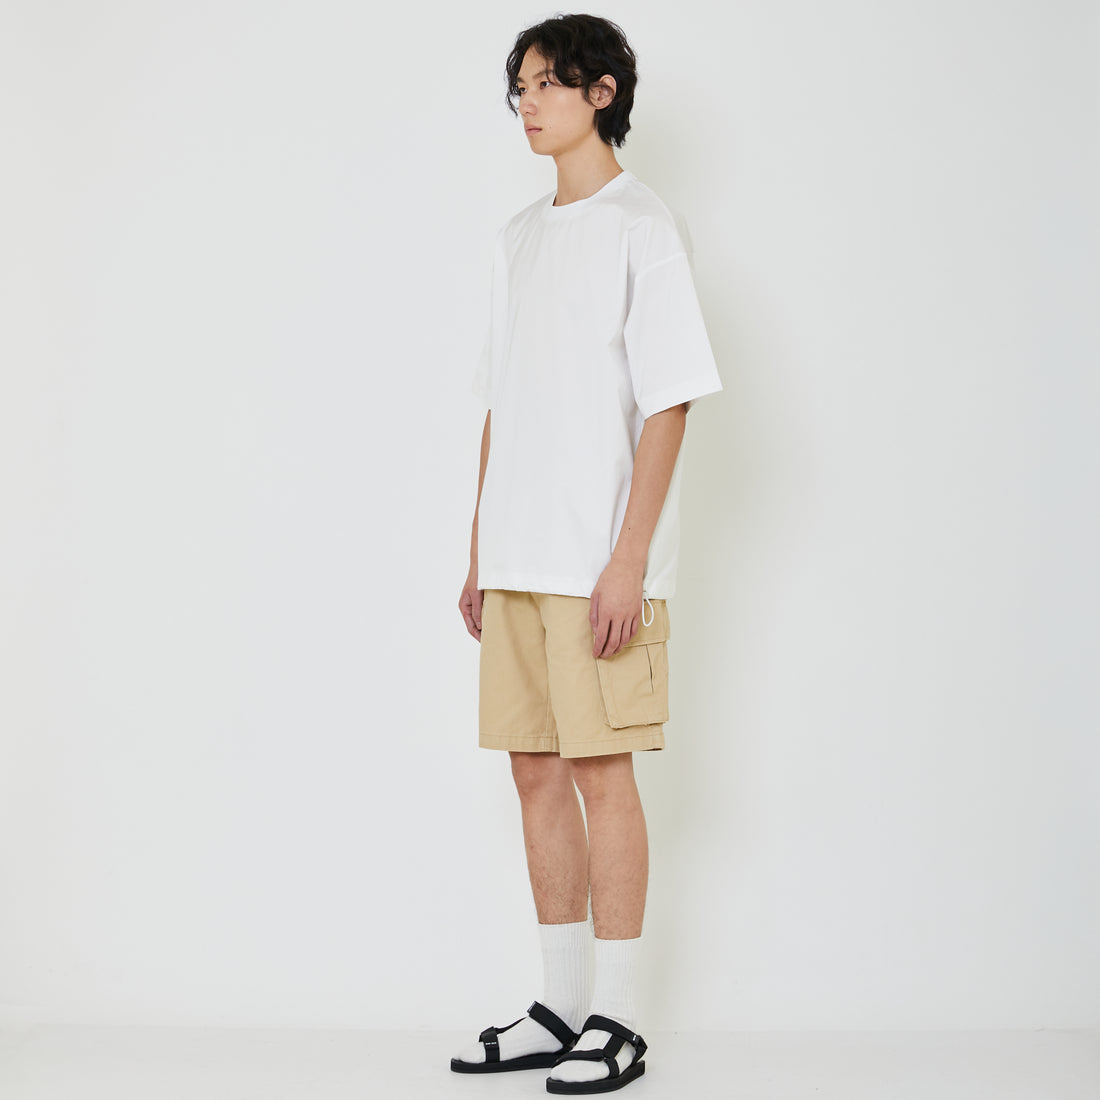 Men Oversized Top - Off White - SM2402032A